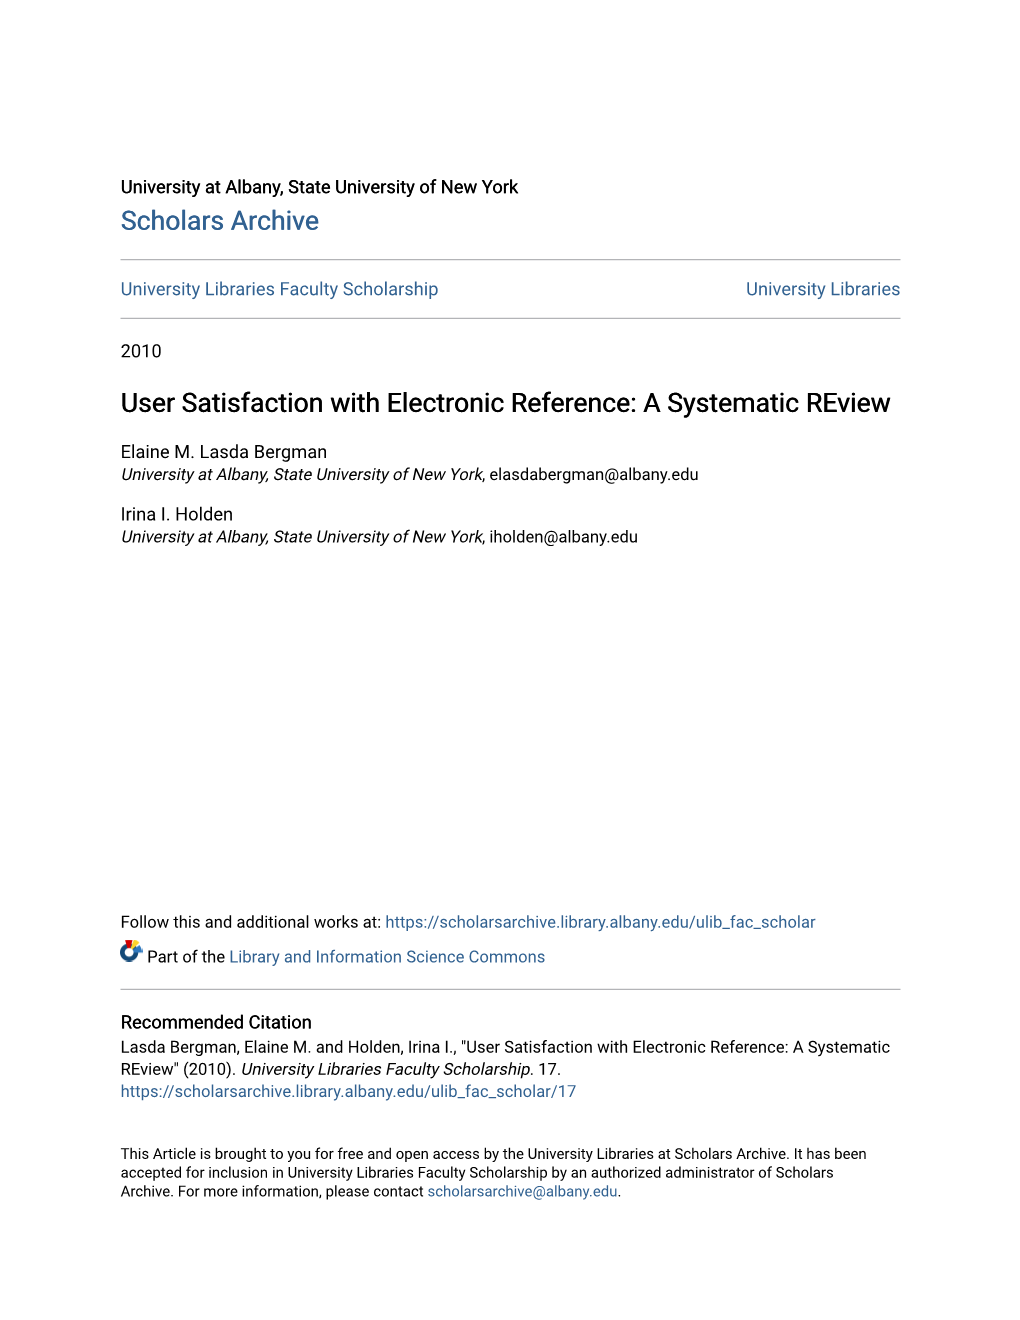 User Satisfaction with Electronic Reference: a Systematic Review